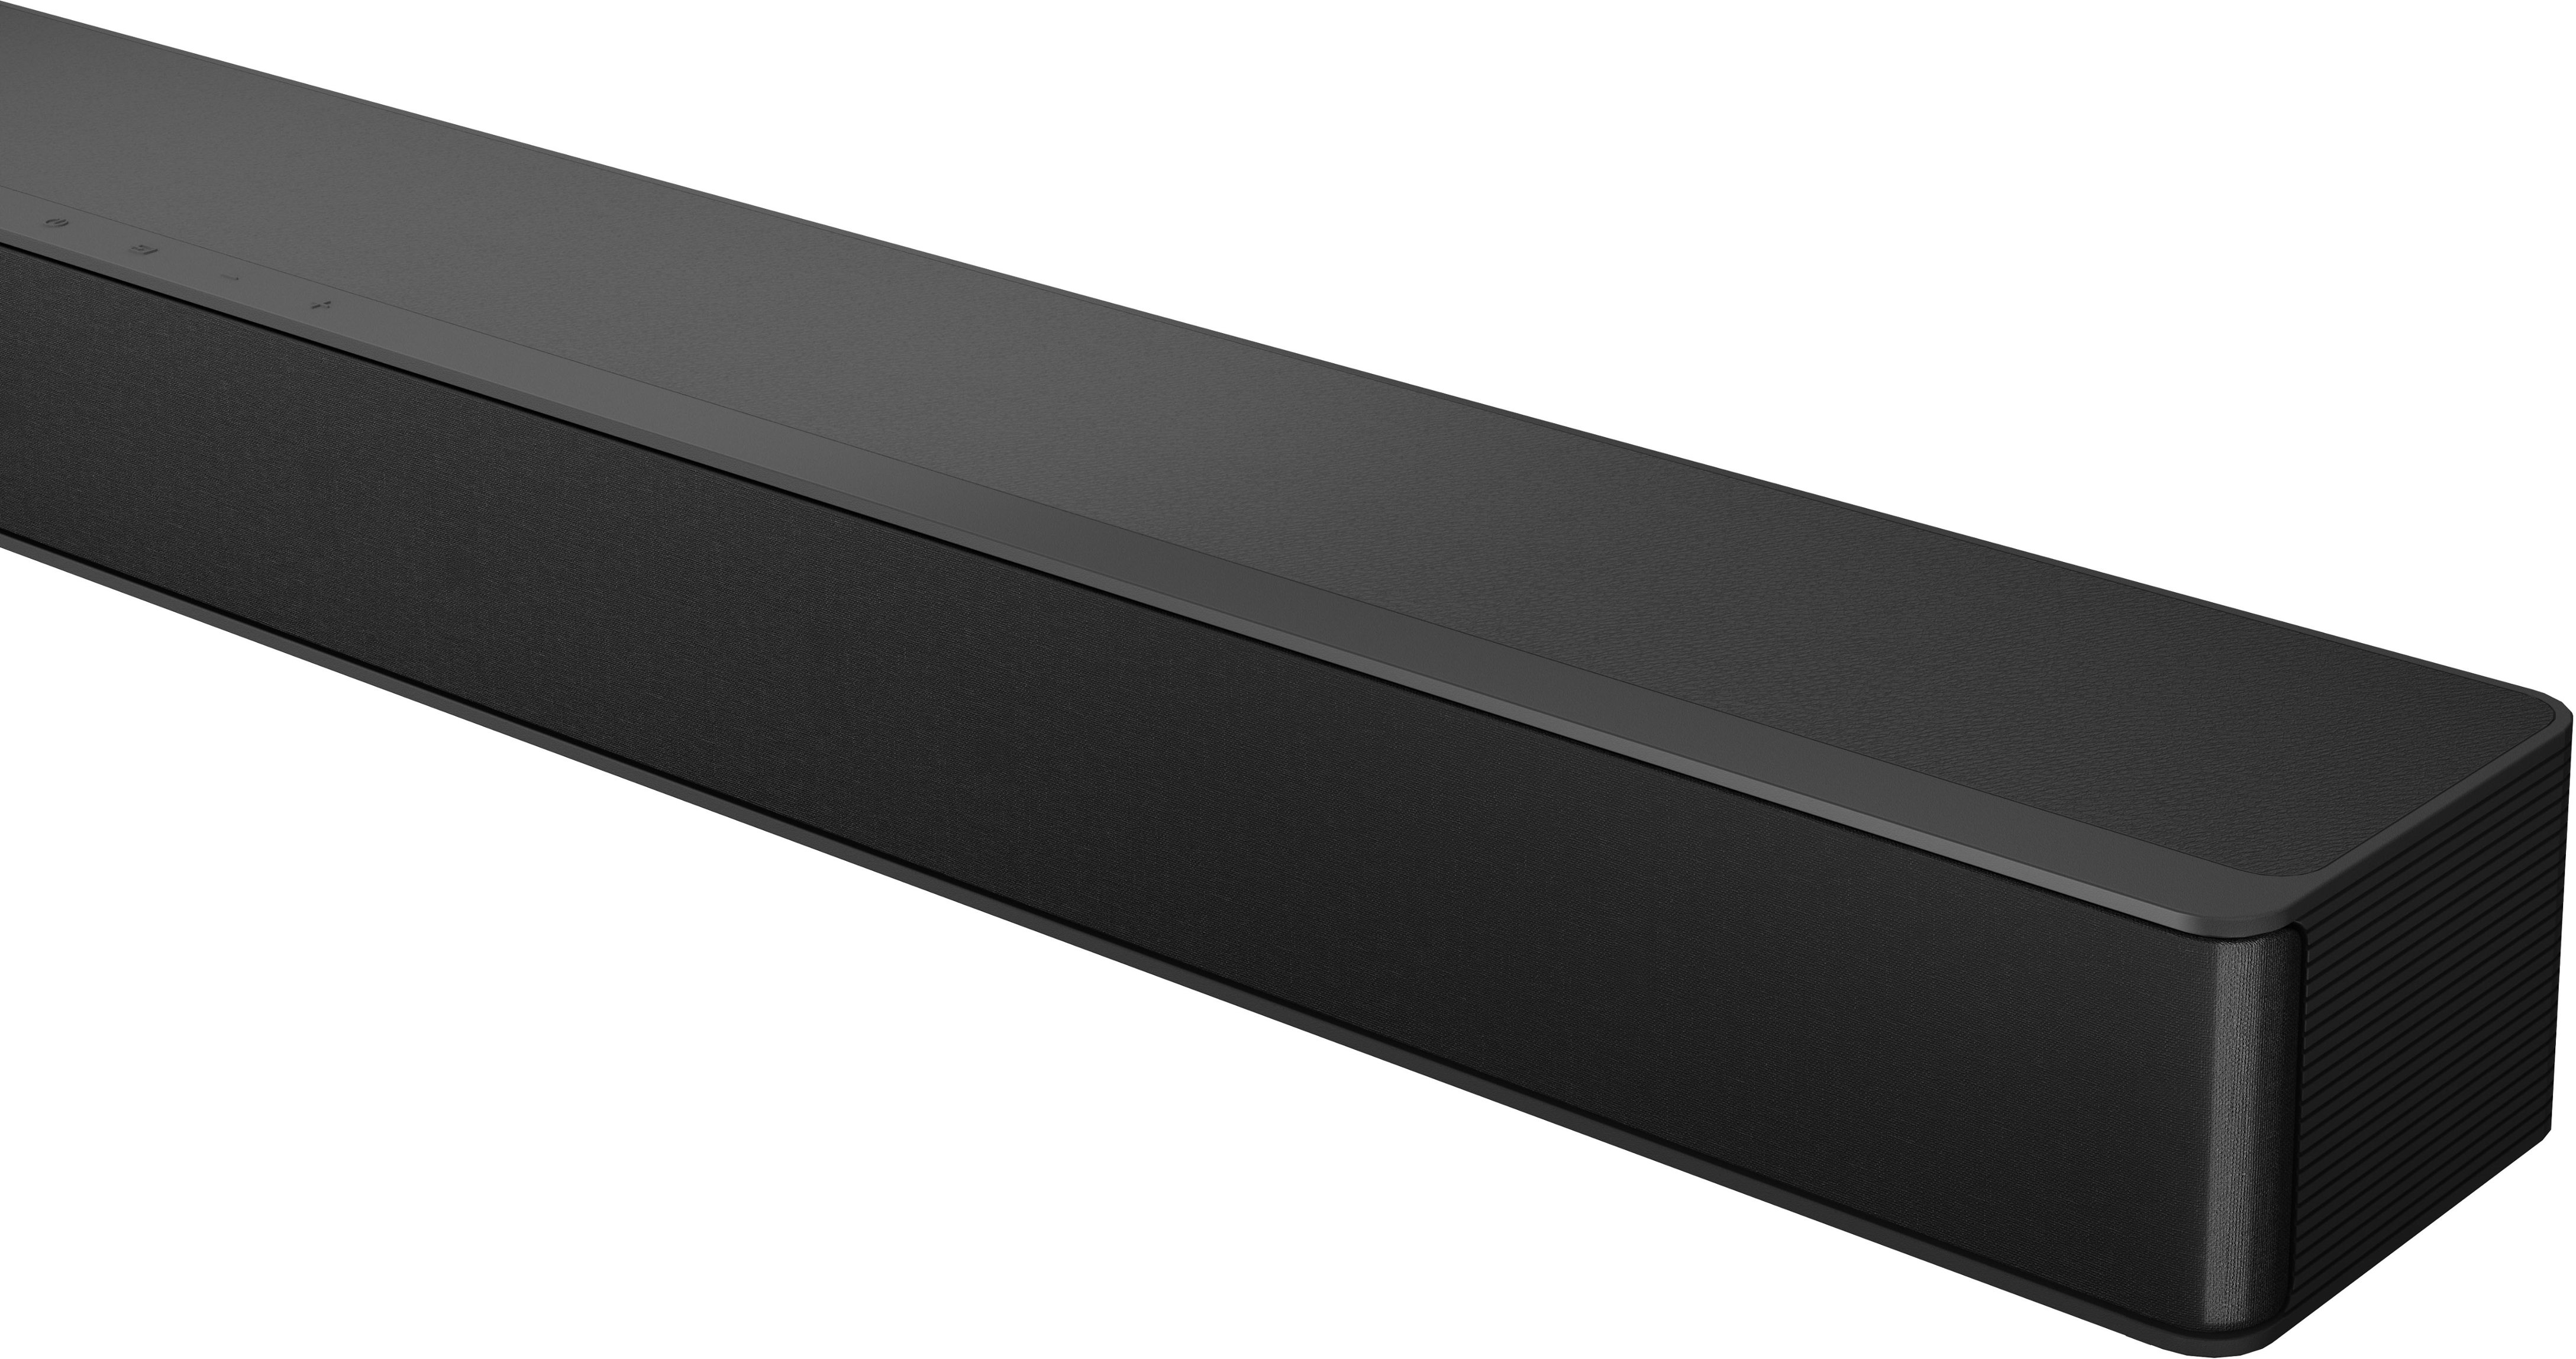 Angle View: Hisense - 2.1 Channel Soundbar with Built-in Subwoofer - Black